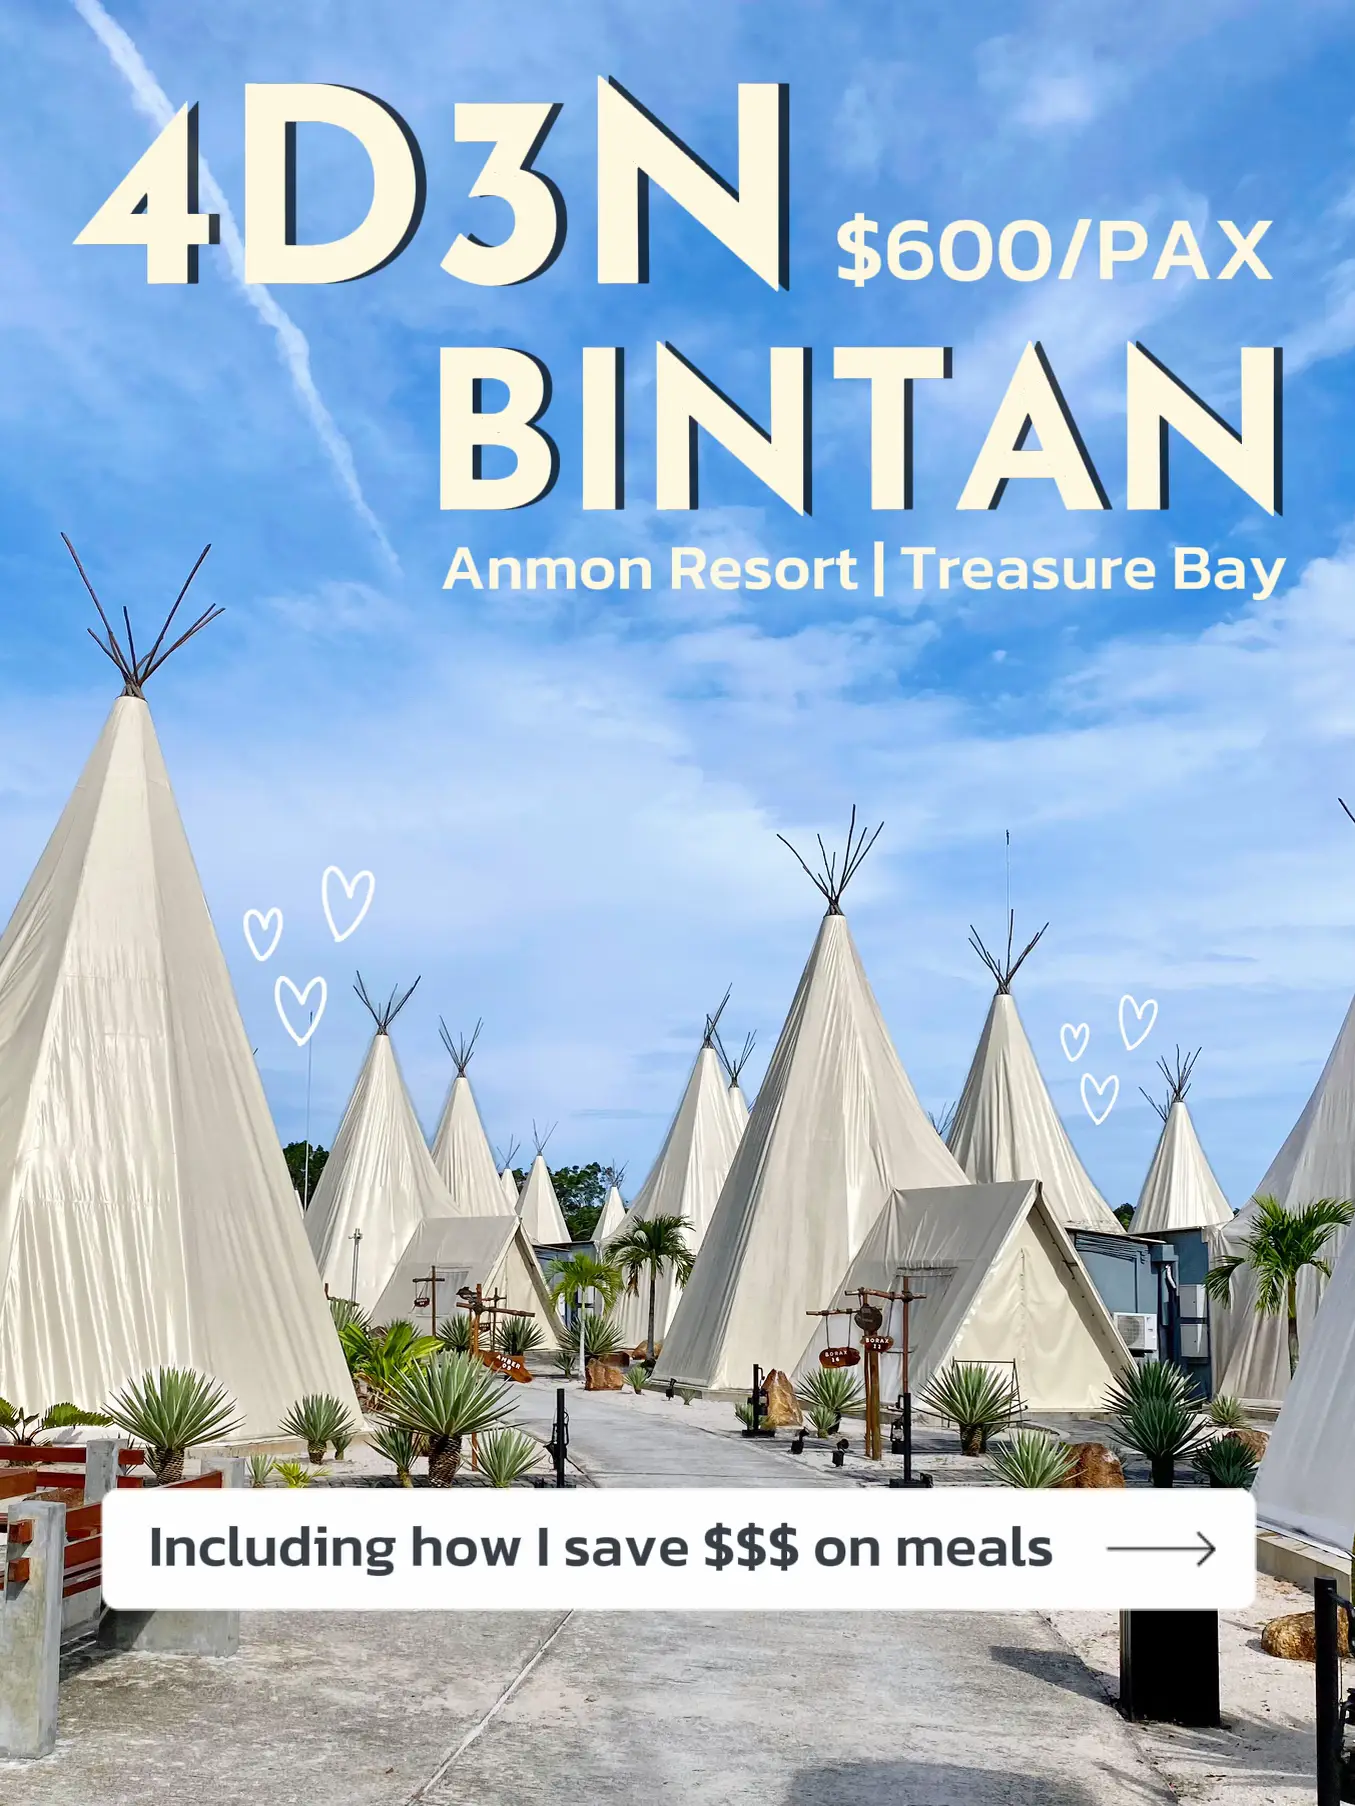 SGD600 for a fun-filled 4 Days in Bintan 🏝️'s images(0)